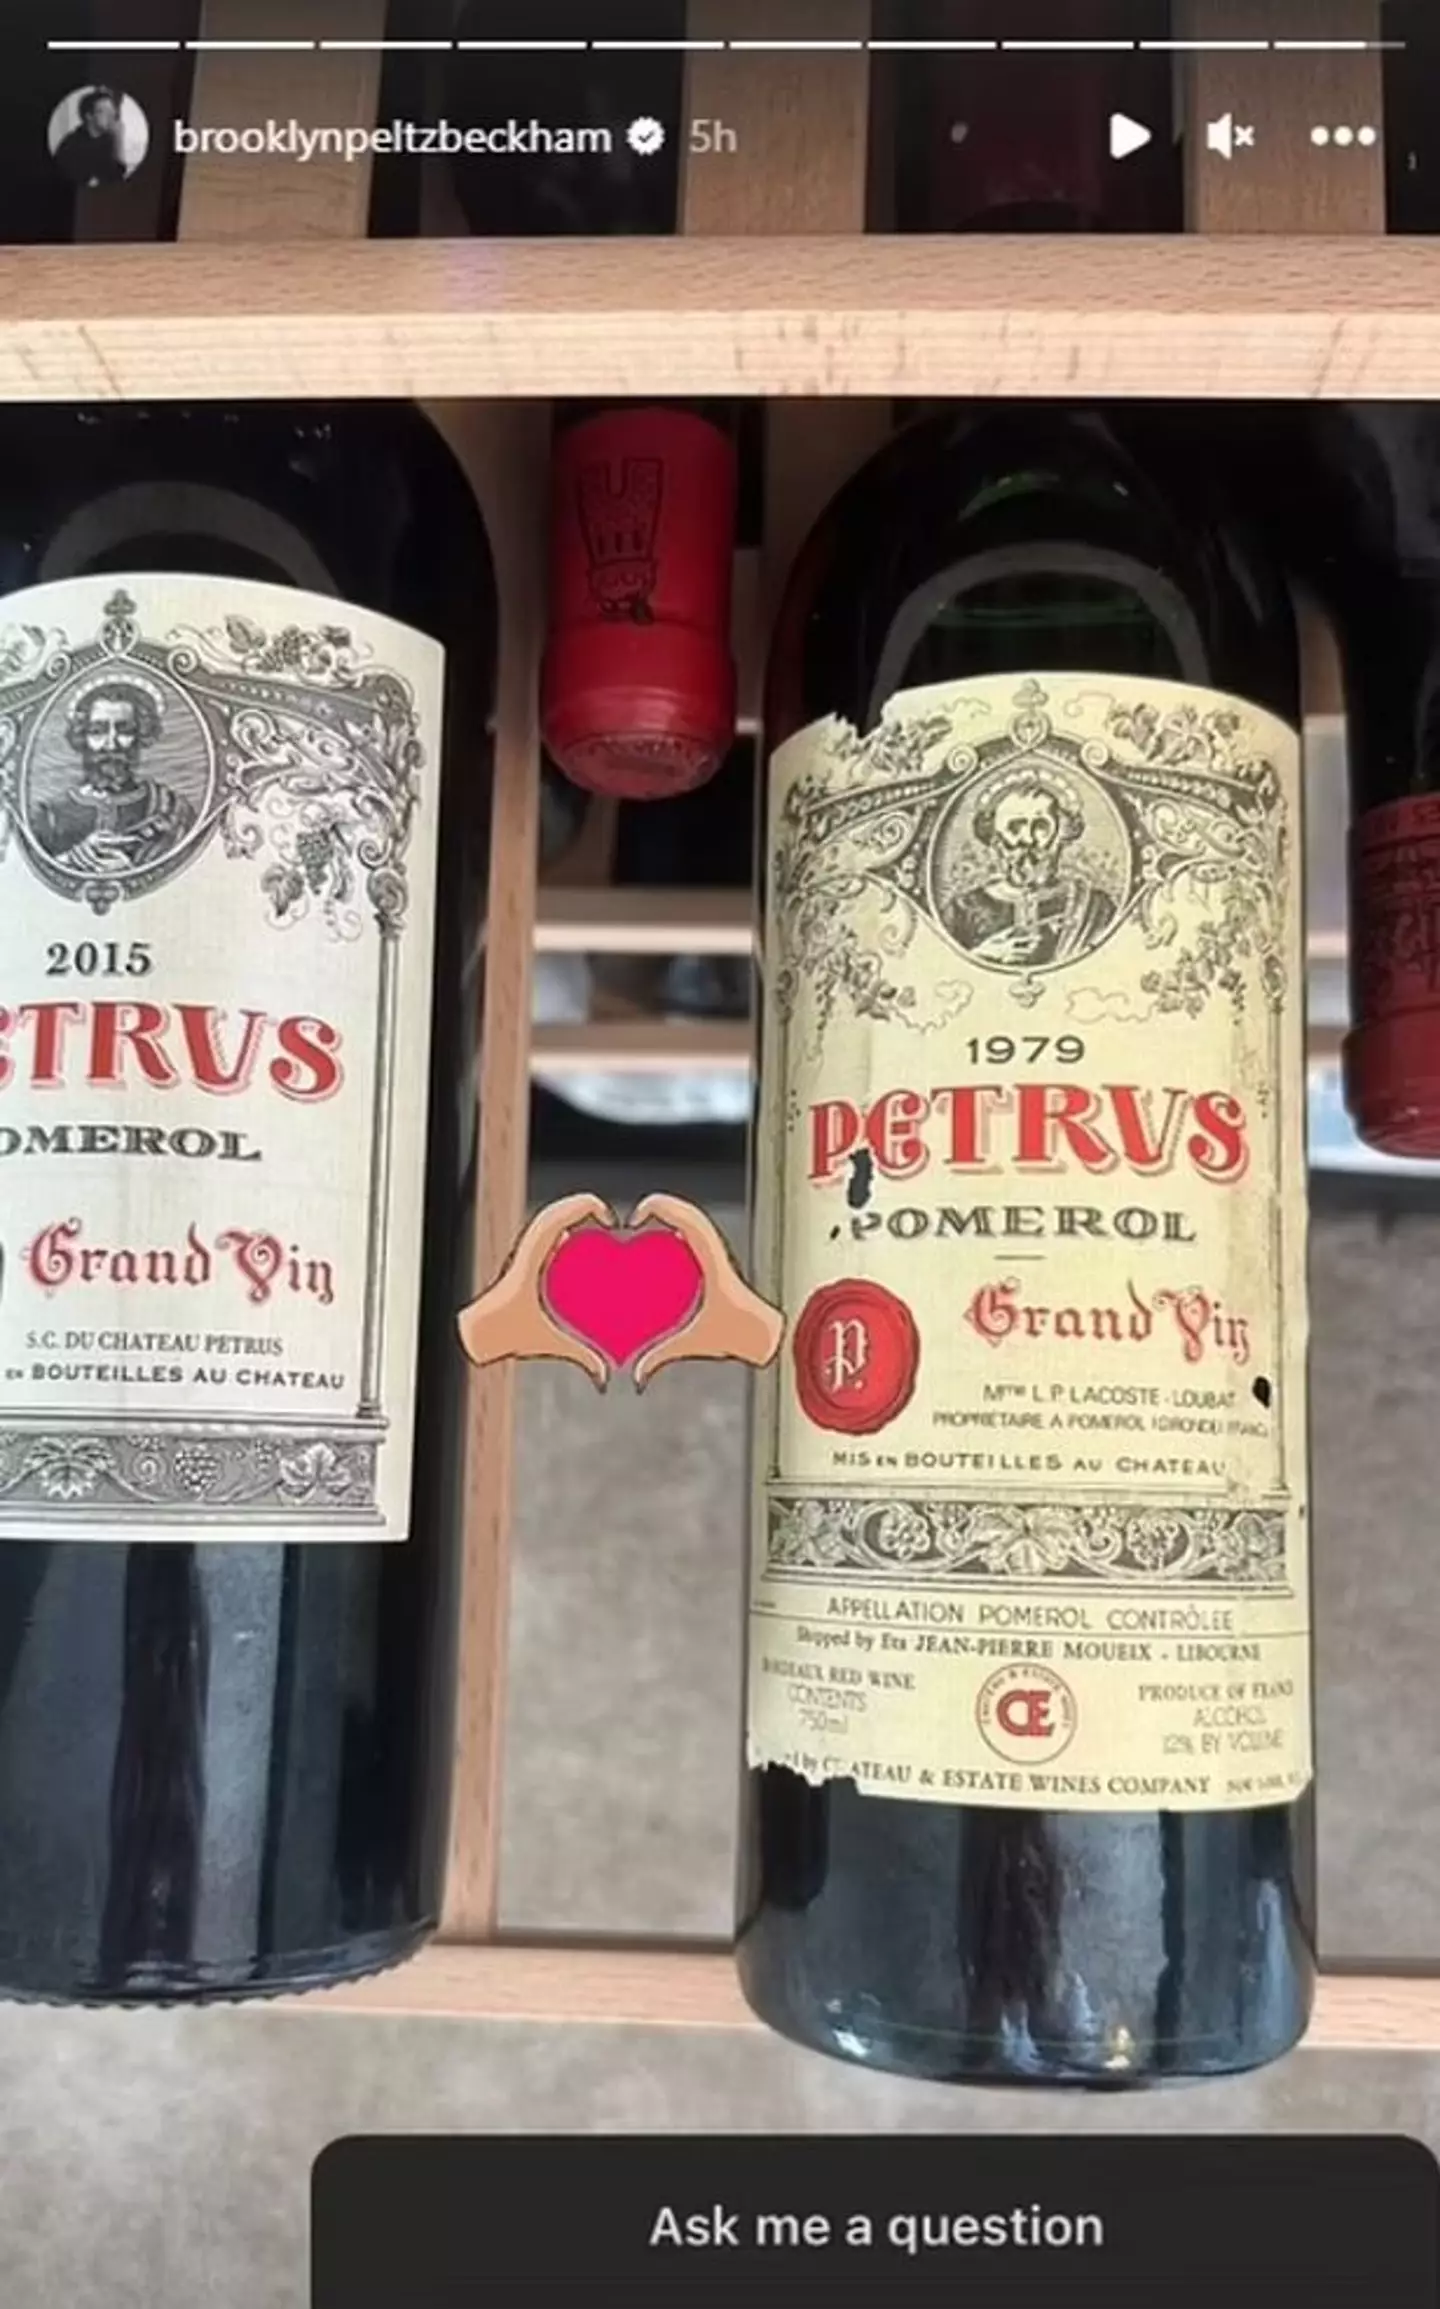 A bottle of Petrus 1979 Pomerol red wine is worth £2,500.